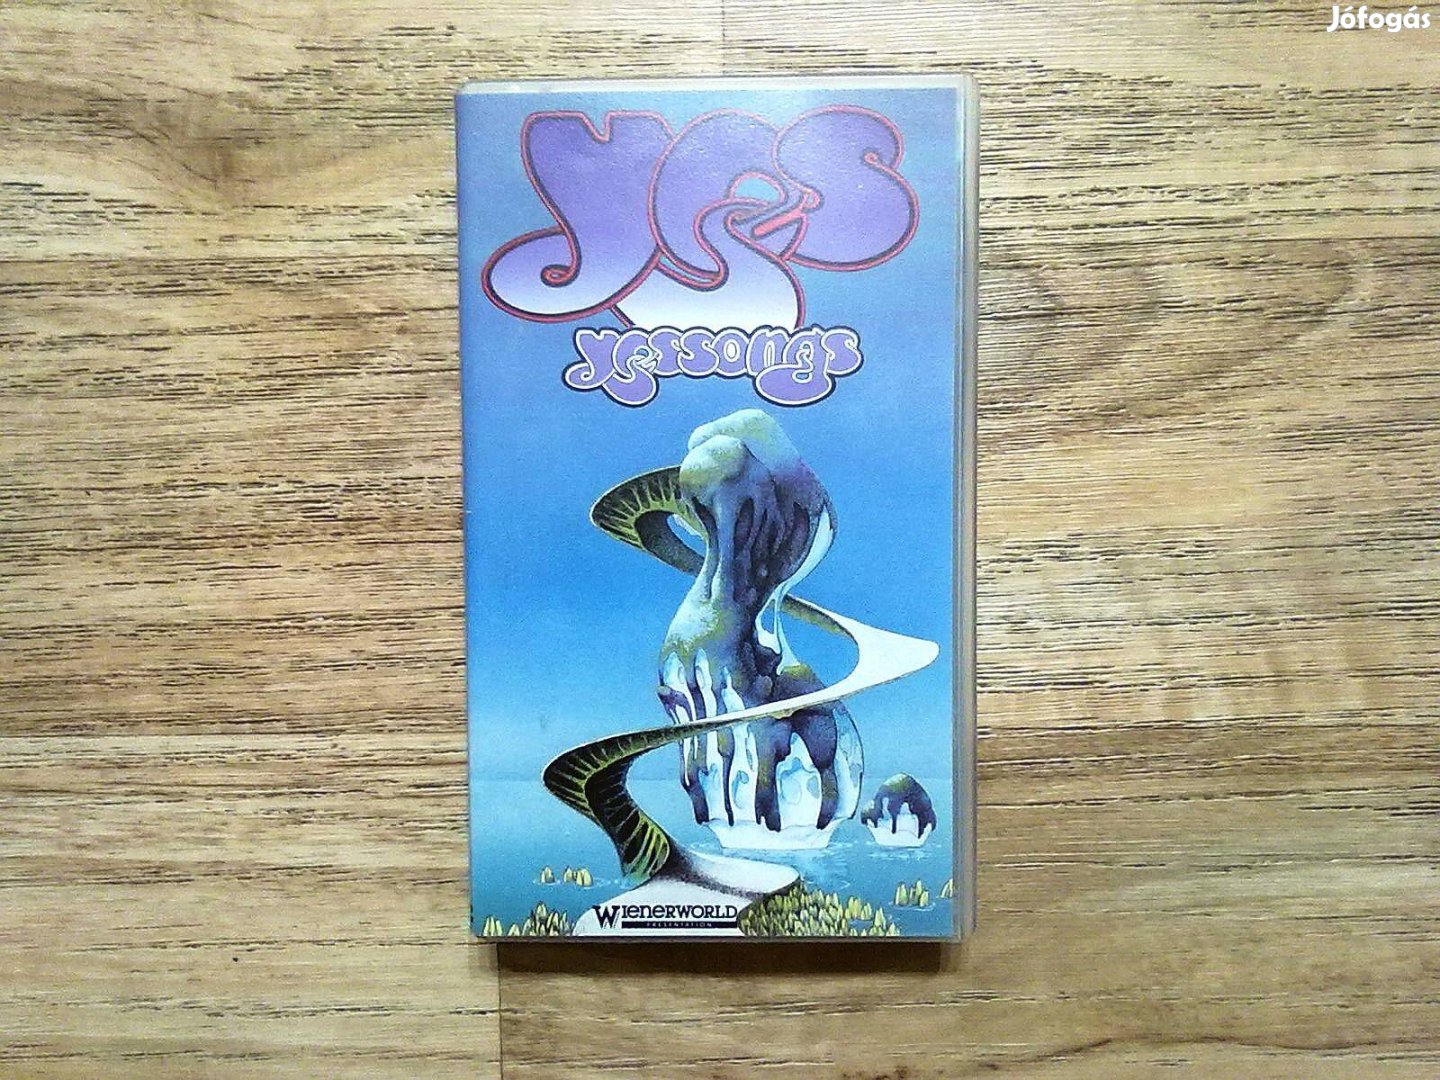 Yes - Yessongs (Digitally Mastered, VHS, HI-Fi, Stereo)